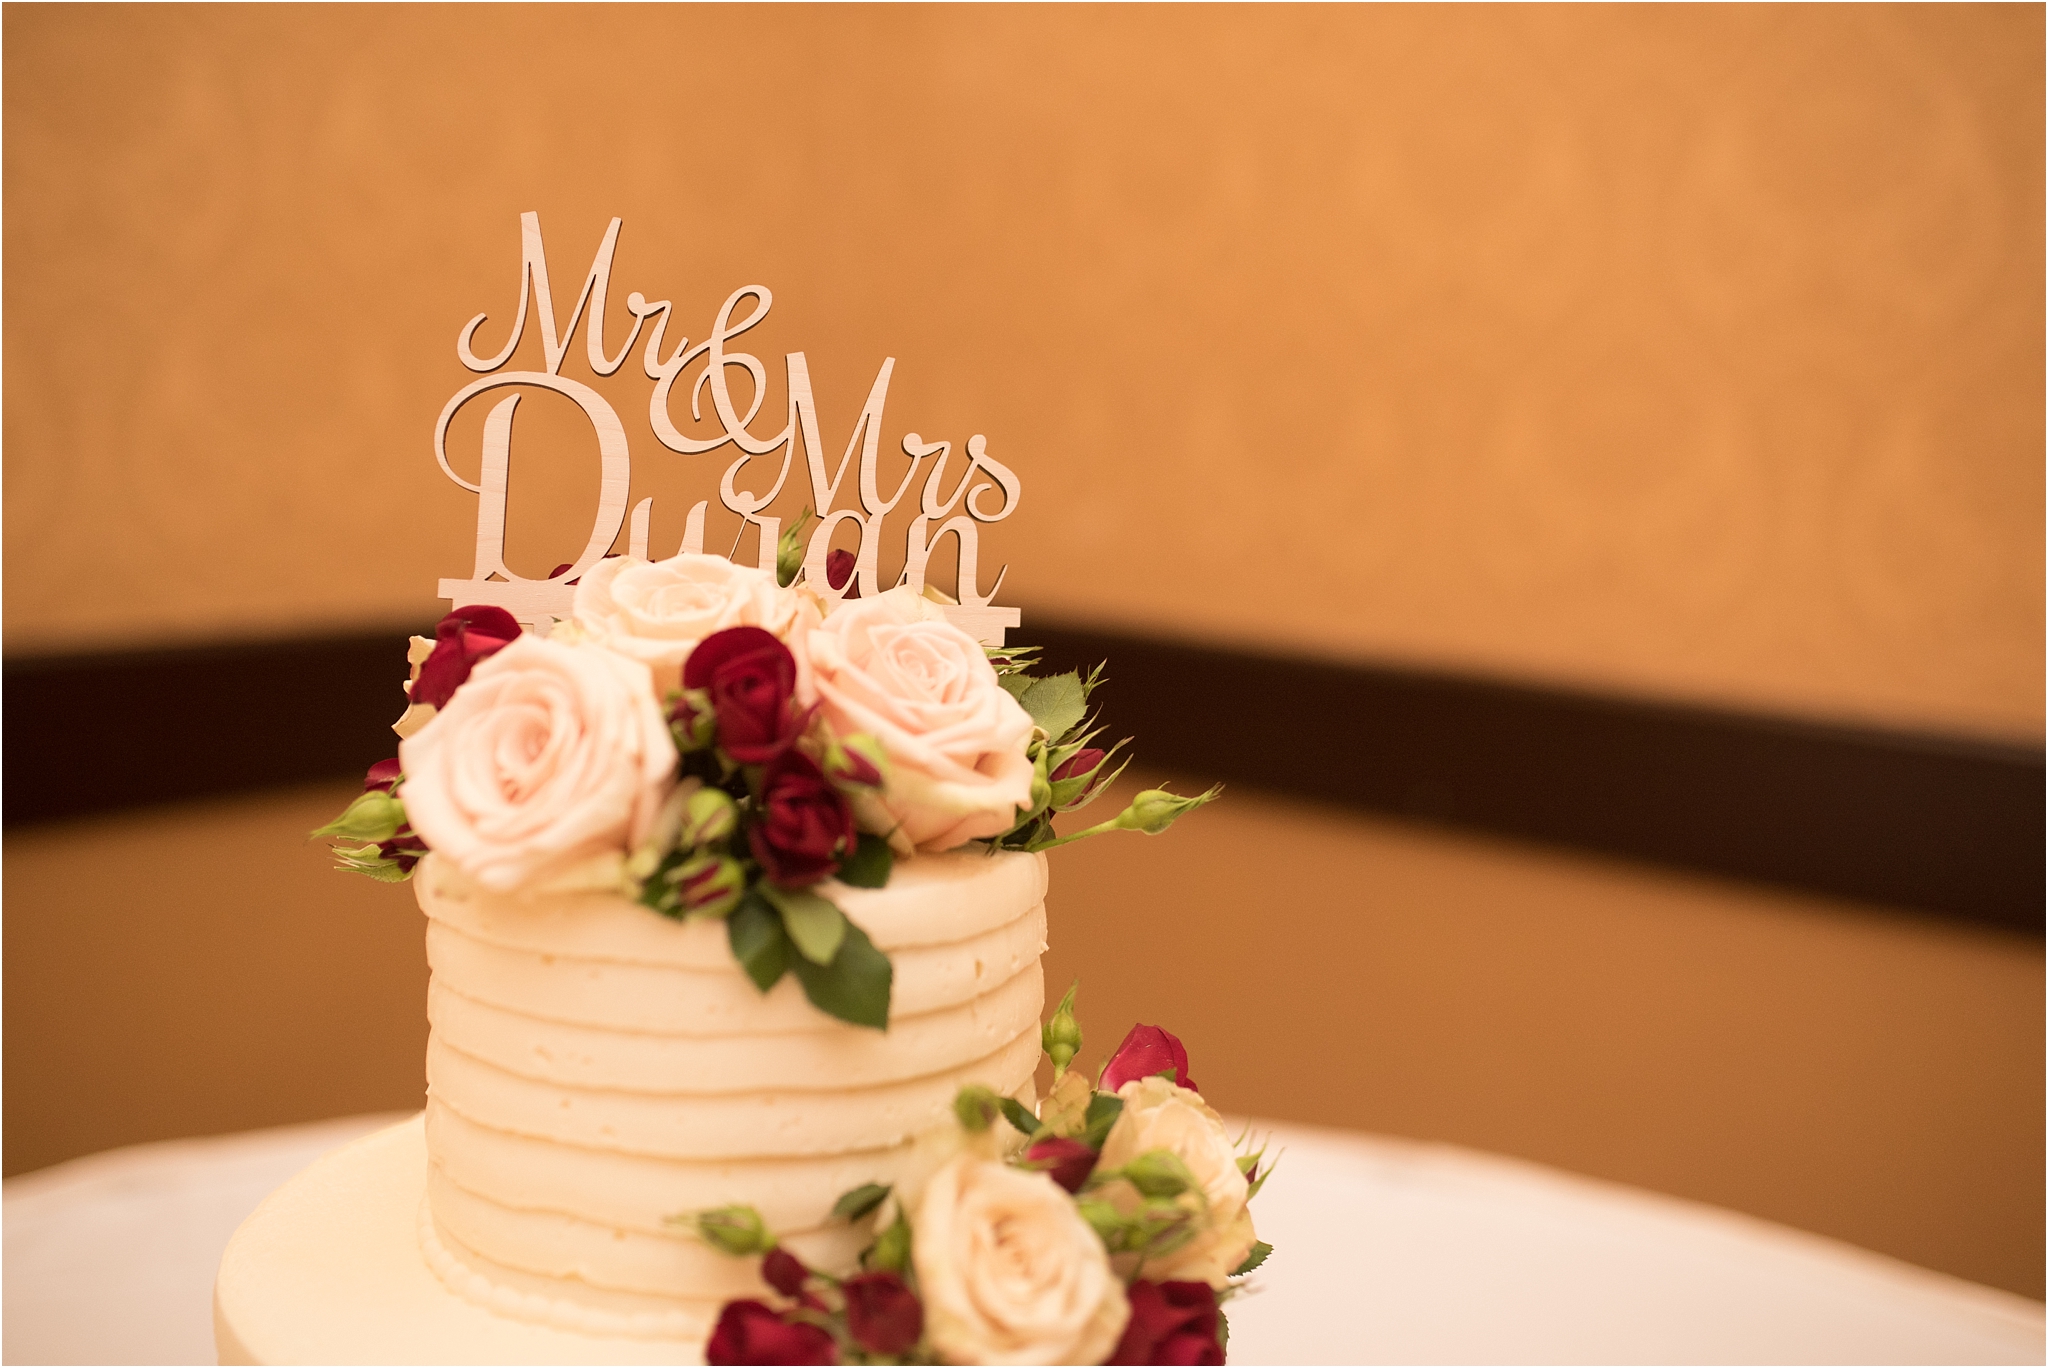 kayla kitts photography - albuquerque wedding photographer - hairpins and scissors - a cake odyssey - new mexico wedding photographer_0066.jpg